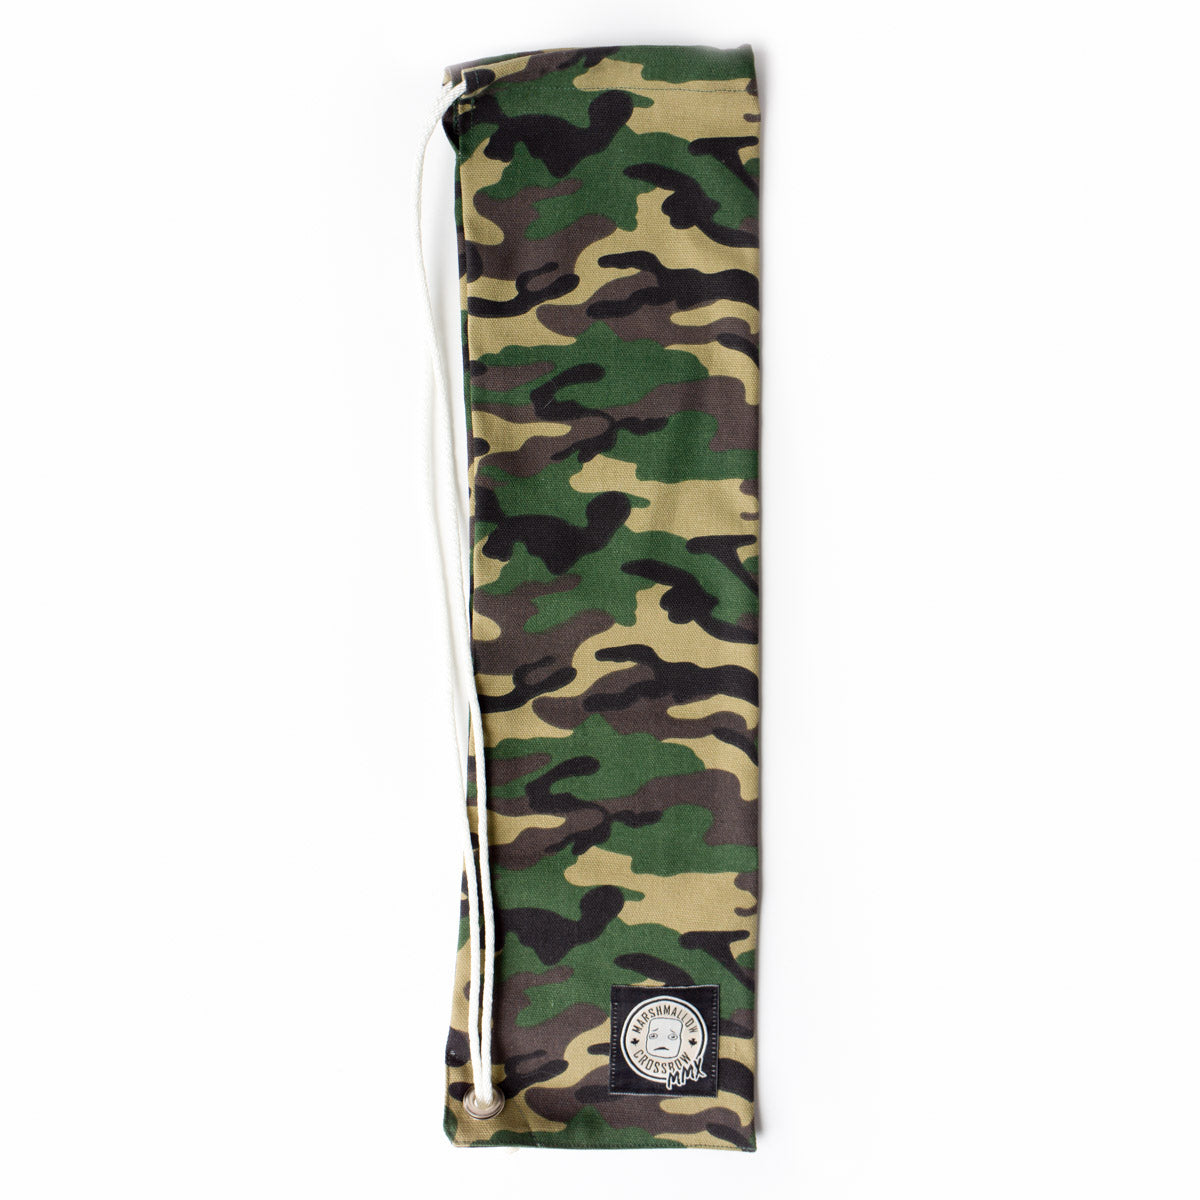 Carry Bag for your MMX Marshmallow Crossbow in Camo